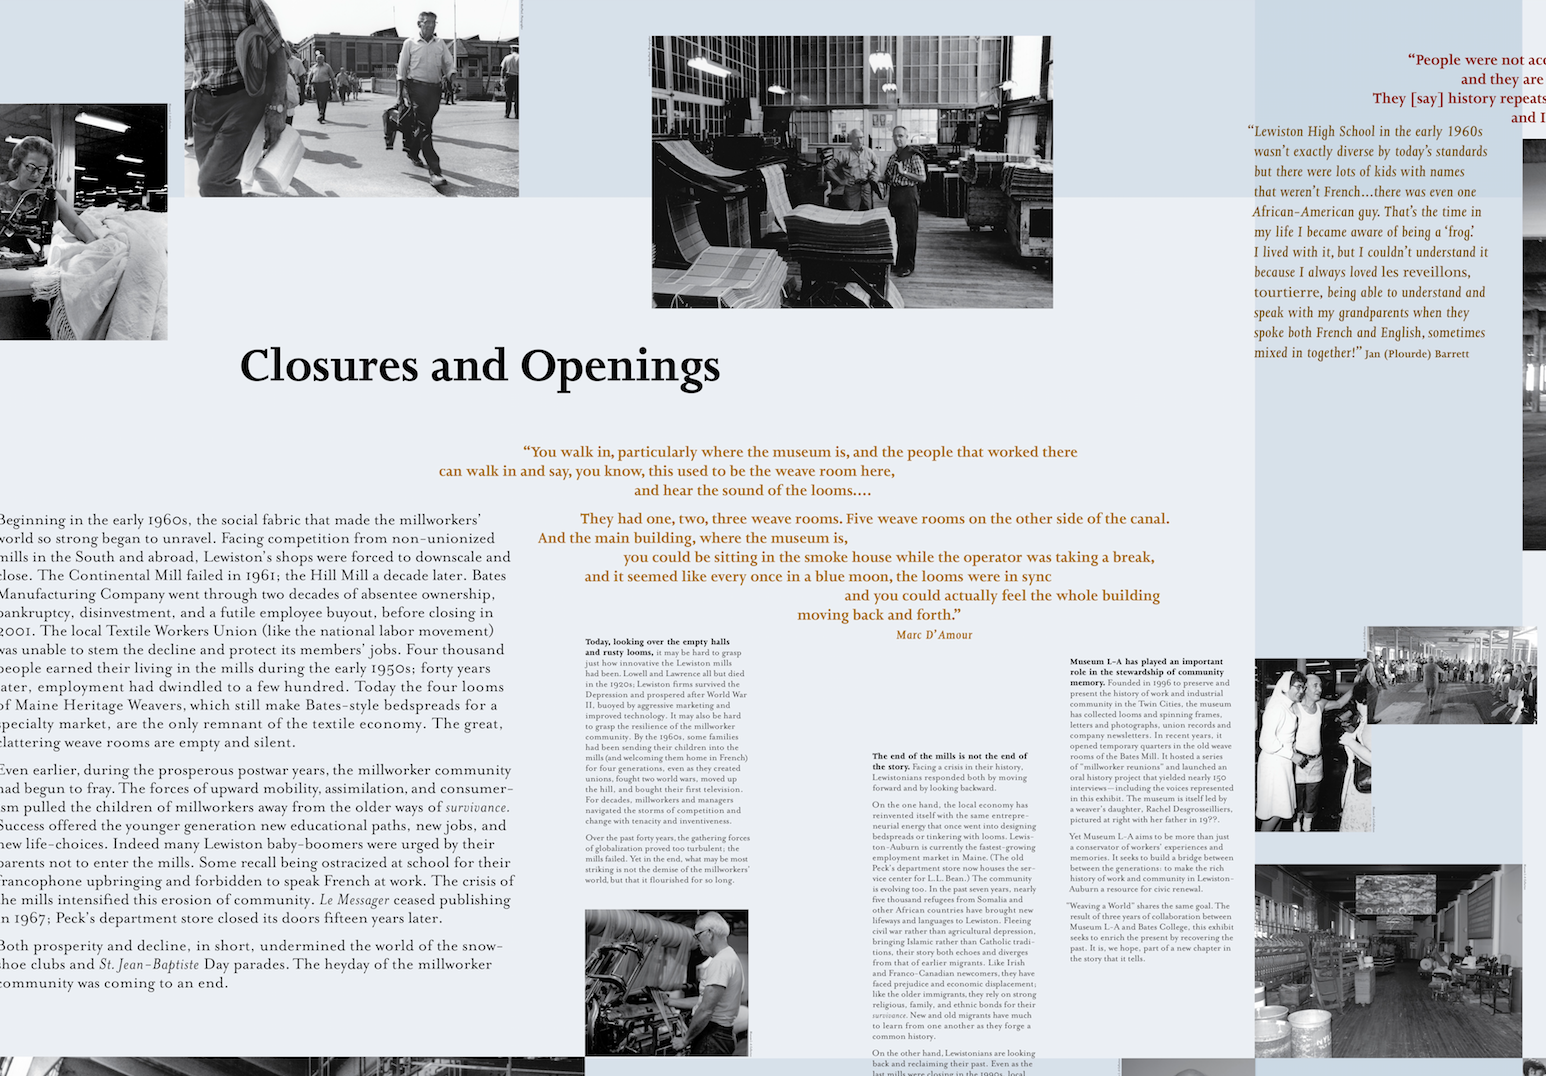 Closures and Openings